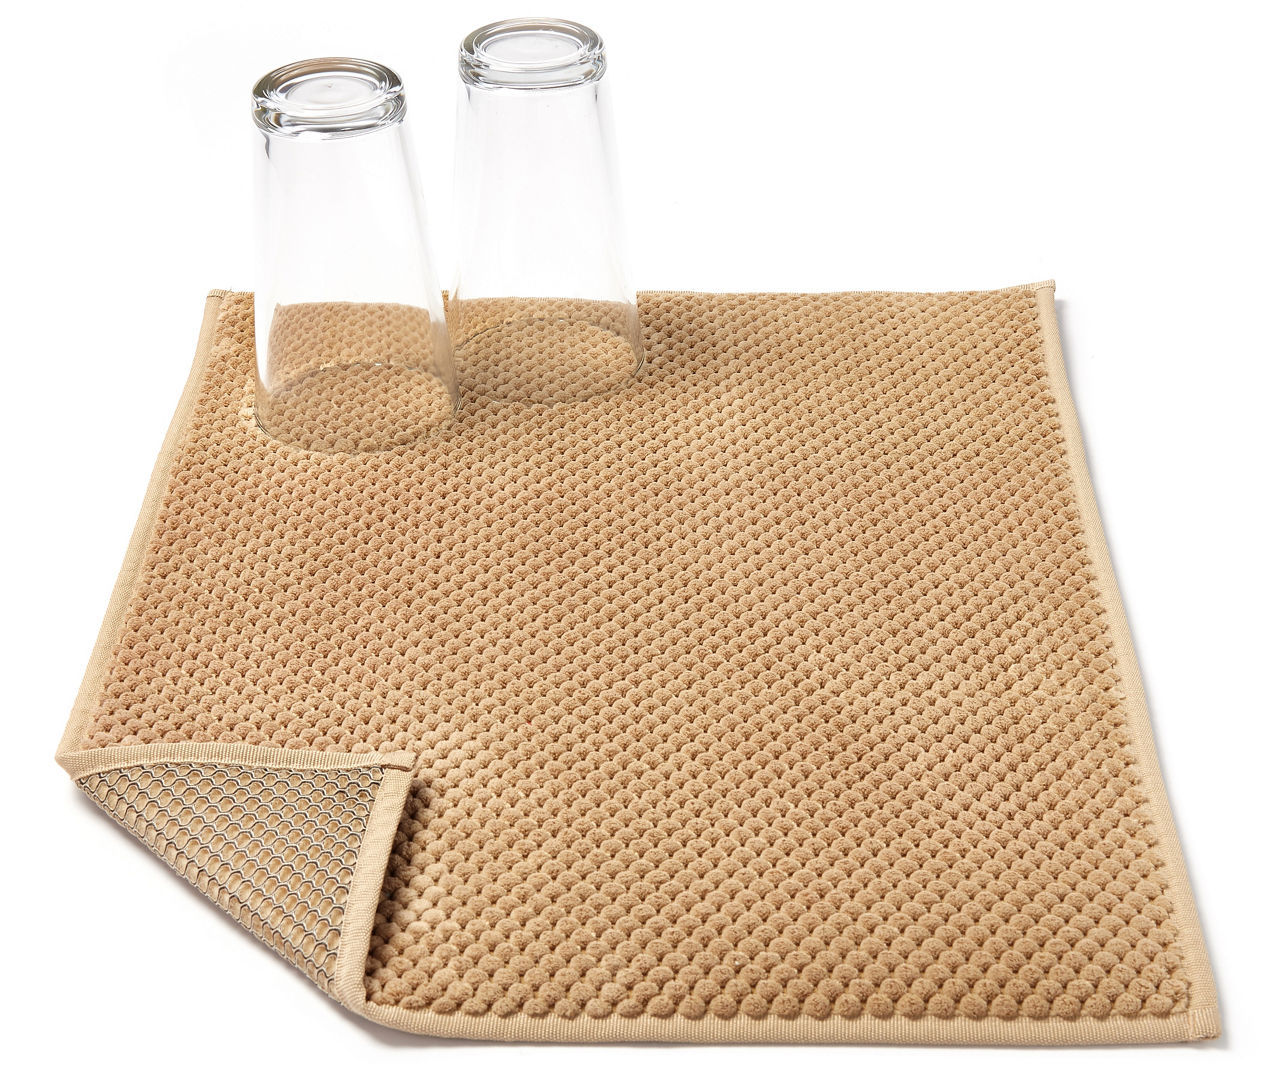 Absorbent Microfiber Dish Drying Mat - Perfect For Keeping Your